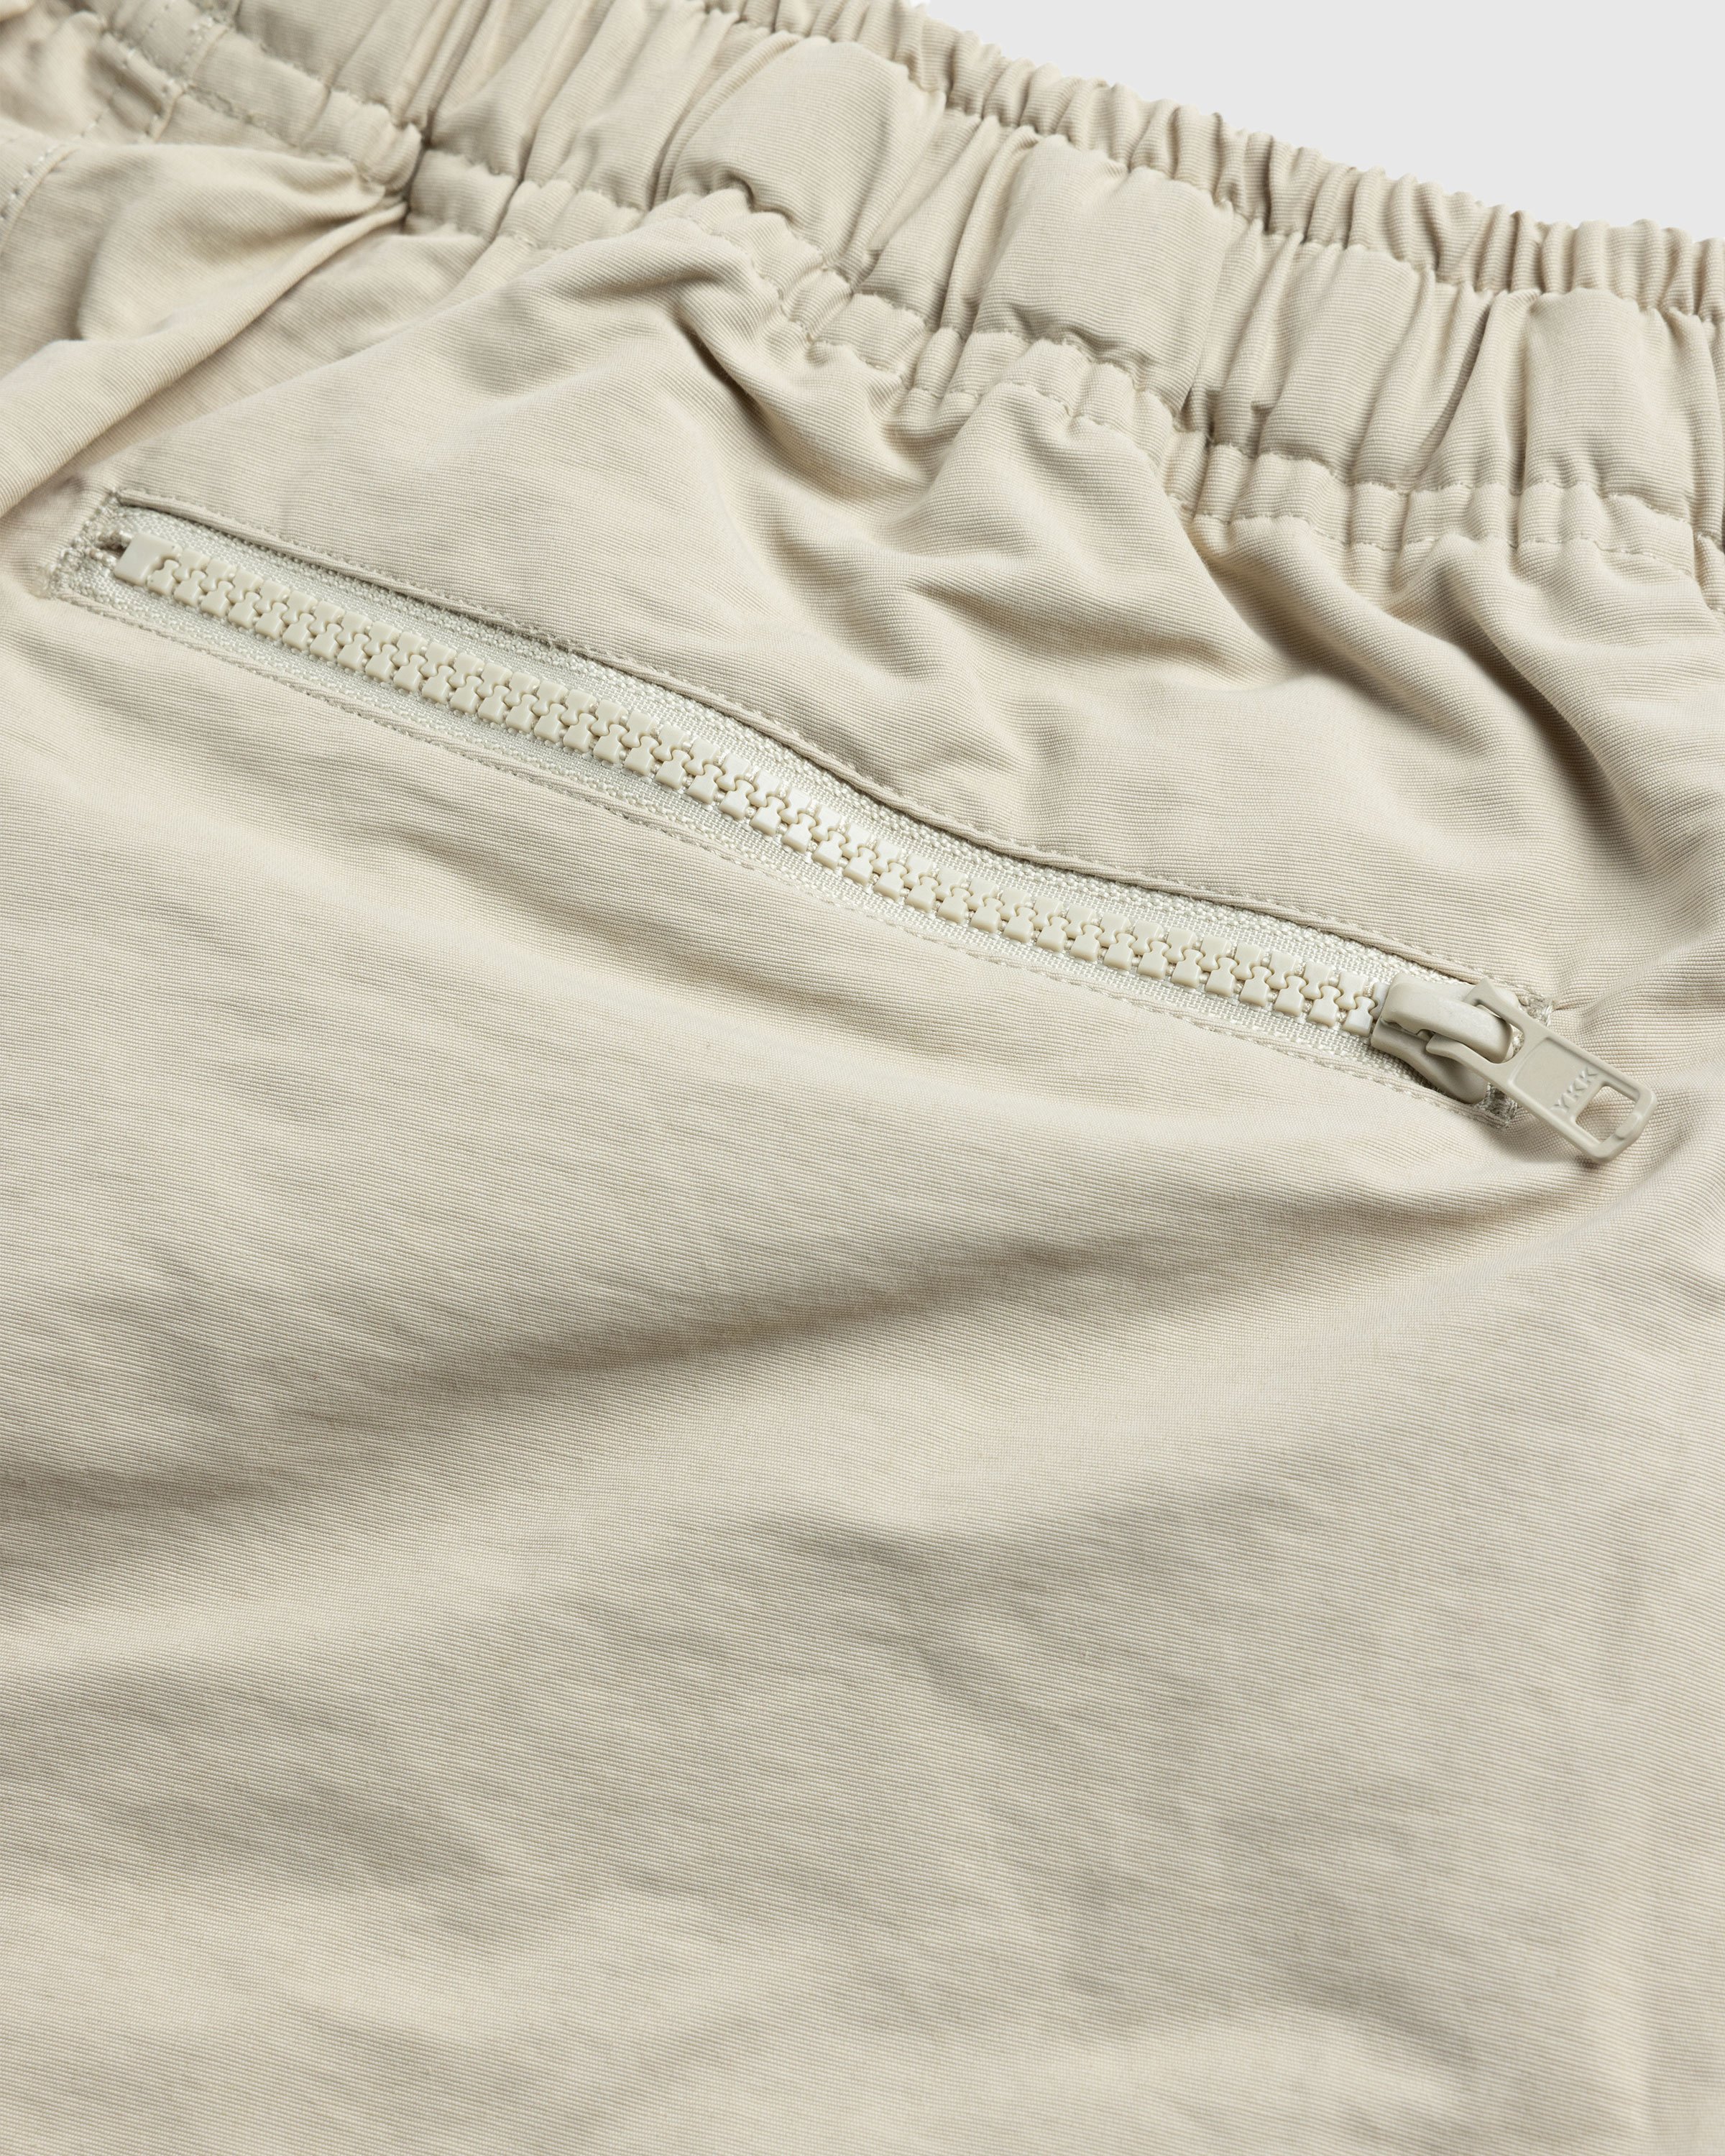 Patta - BELTED TACTICAL CHINO White - Clothing - White - Image 7